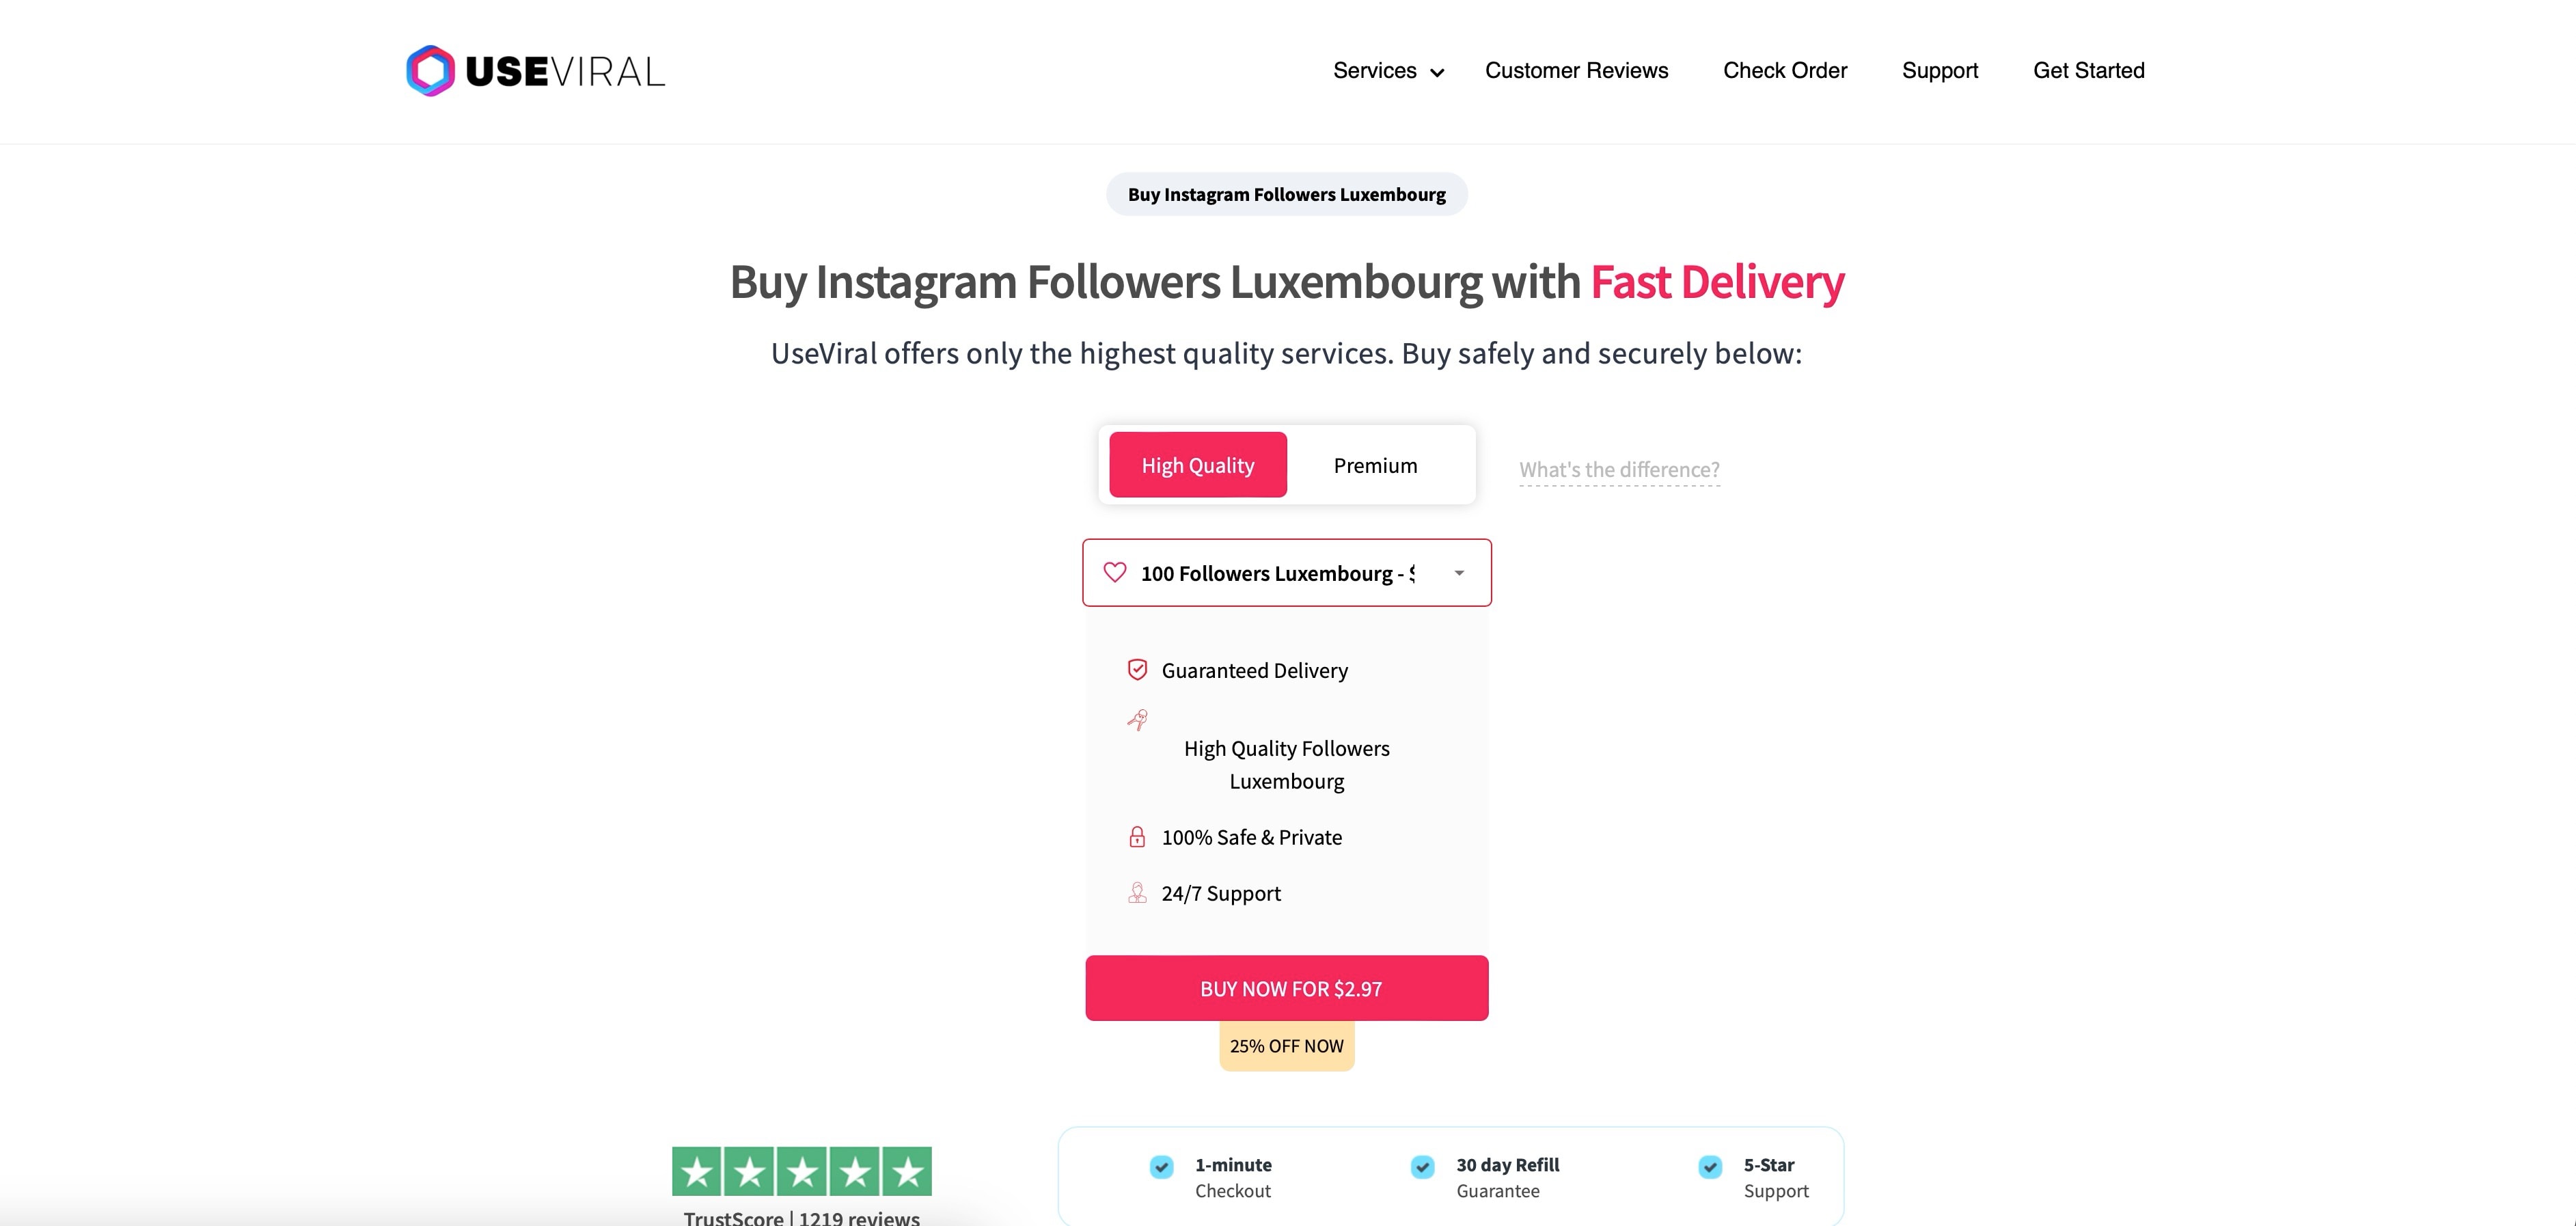 useviral buy instagram followers luxembourg page